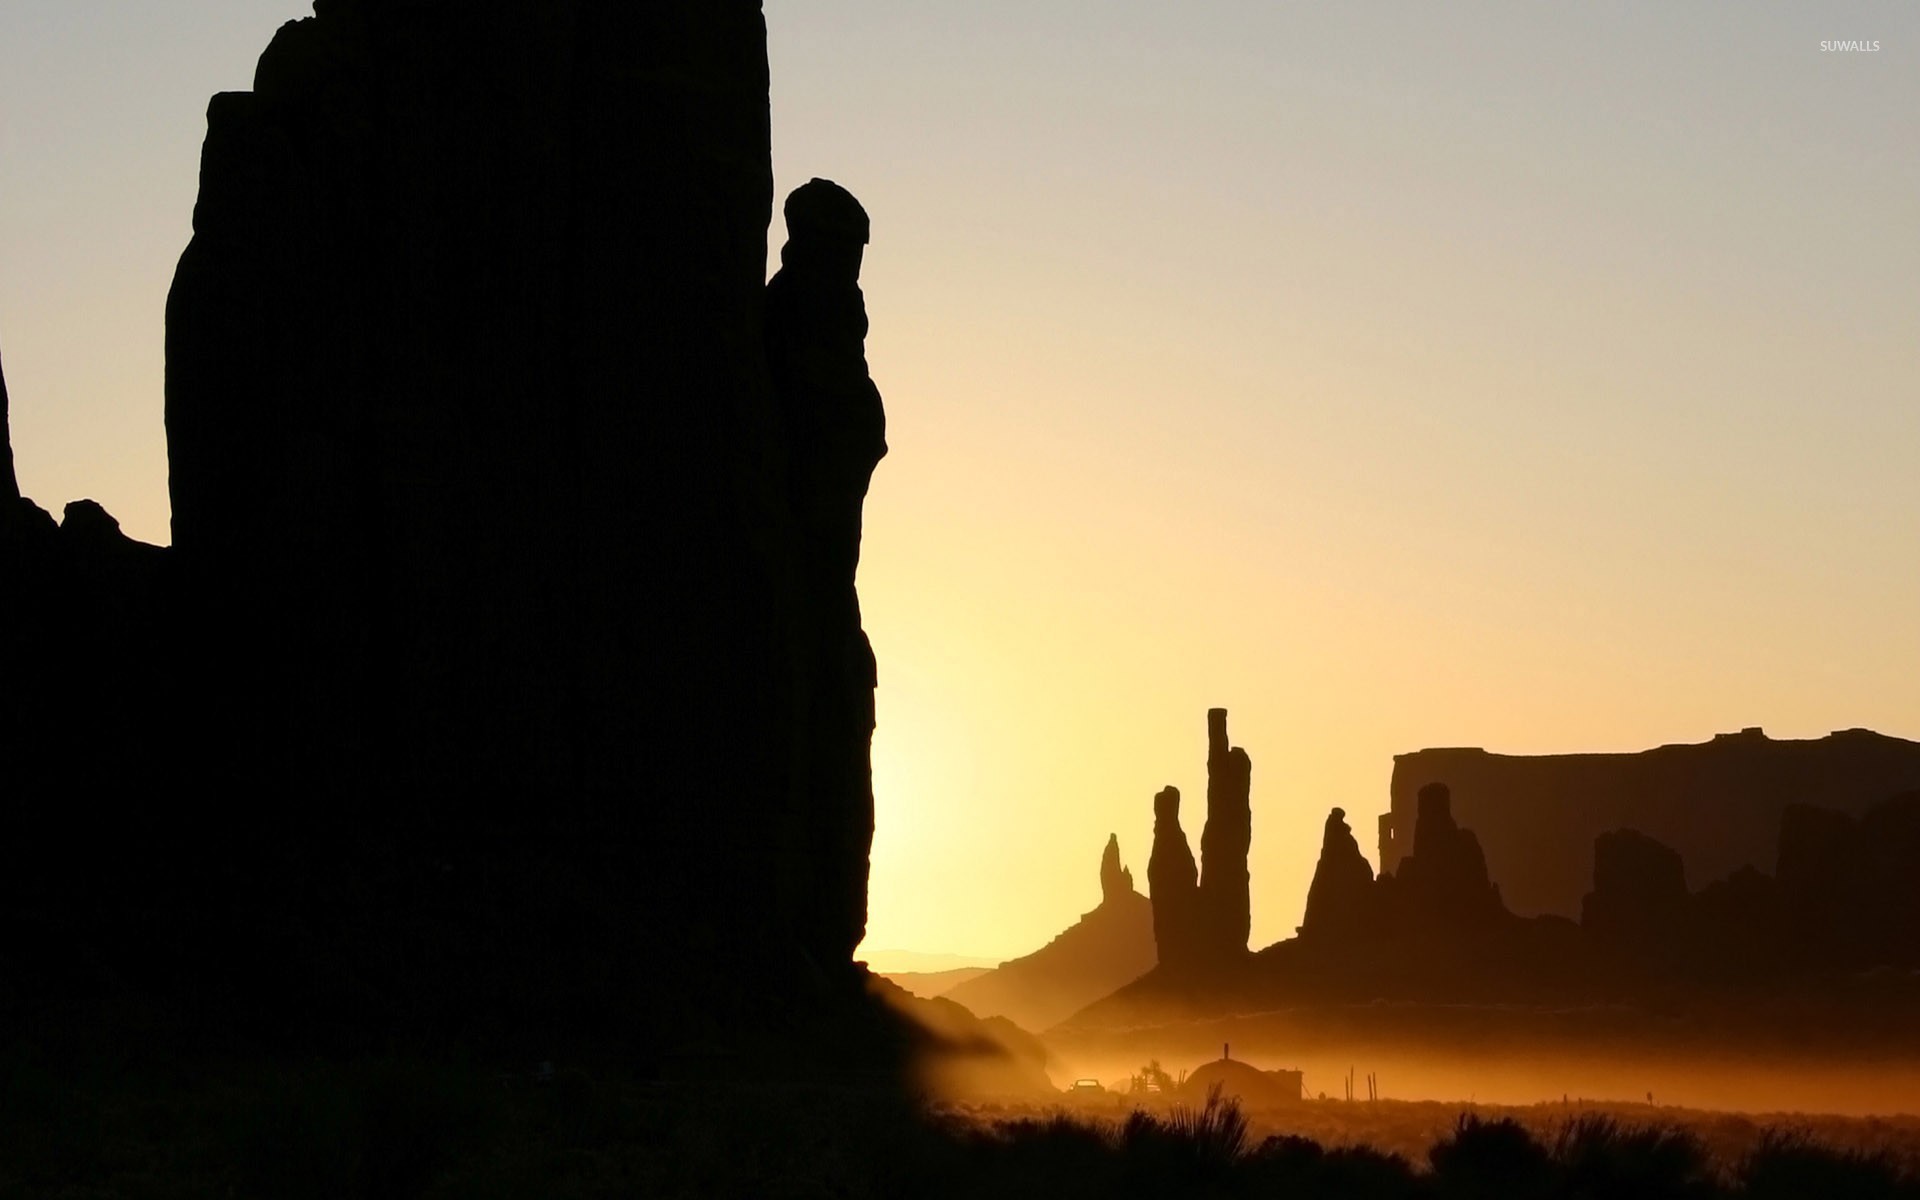 Monument Valley - HD Wallpaper 